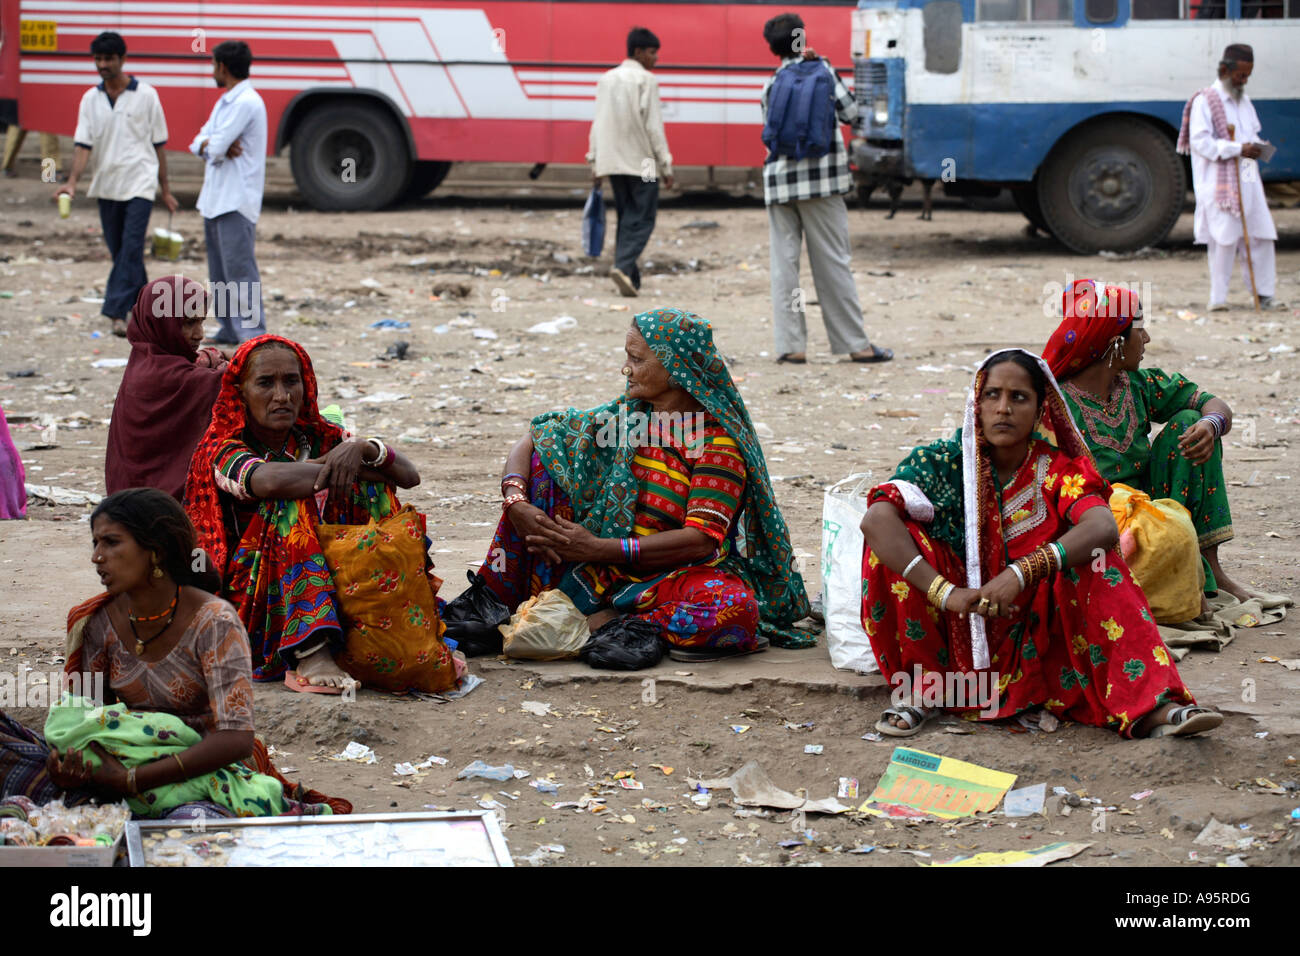 Tribal Indian women from Kutch district seated on ground waiting at bus station, Bhuj, Gujarat, India Stock Photo